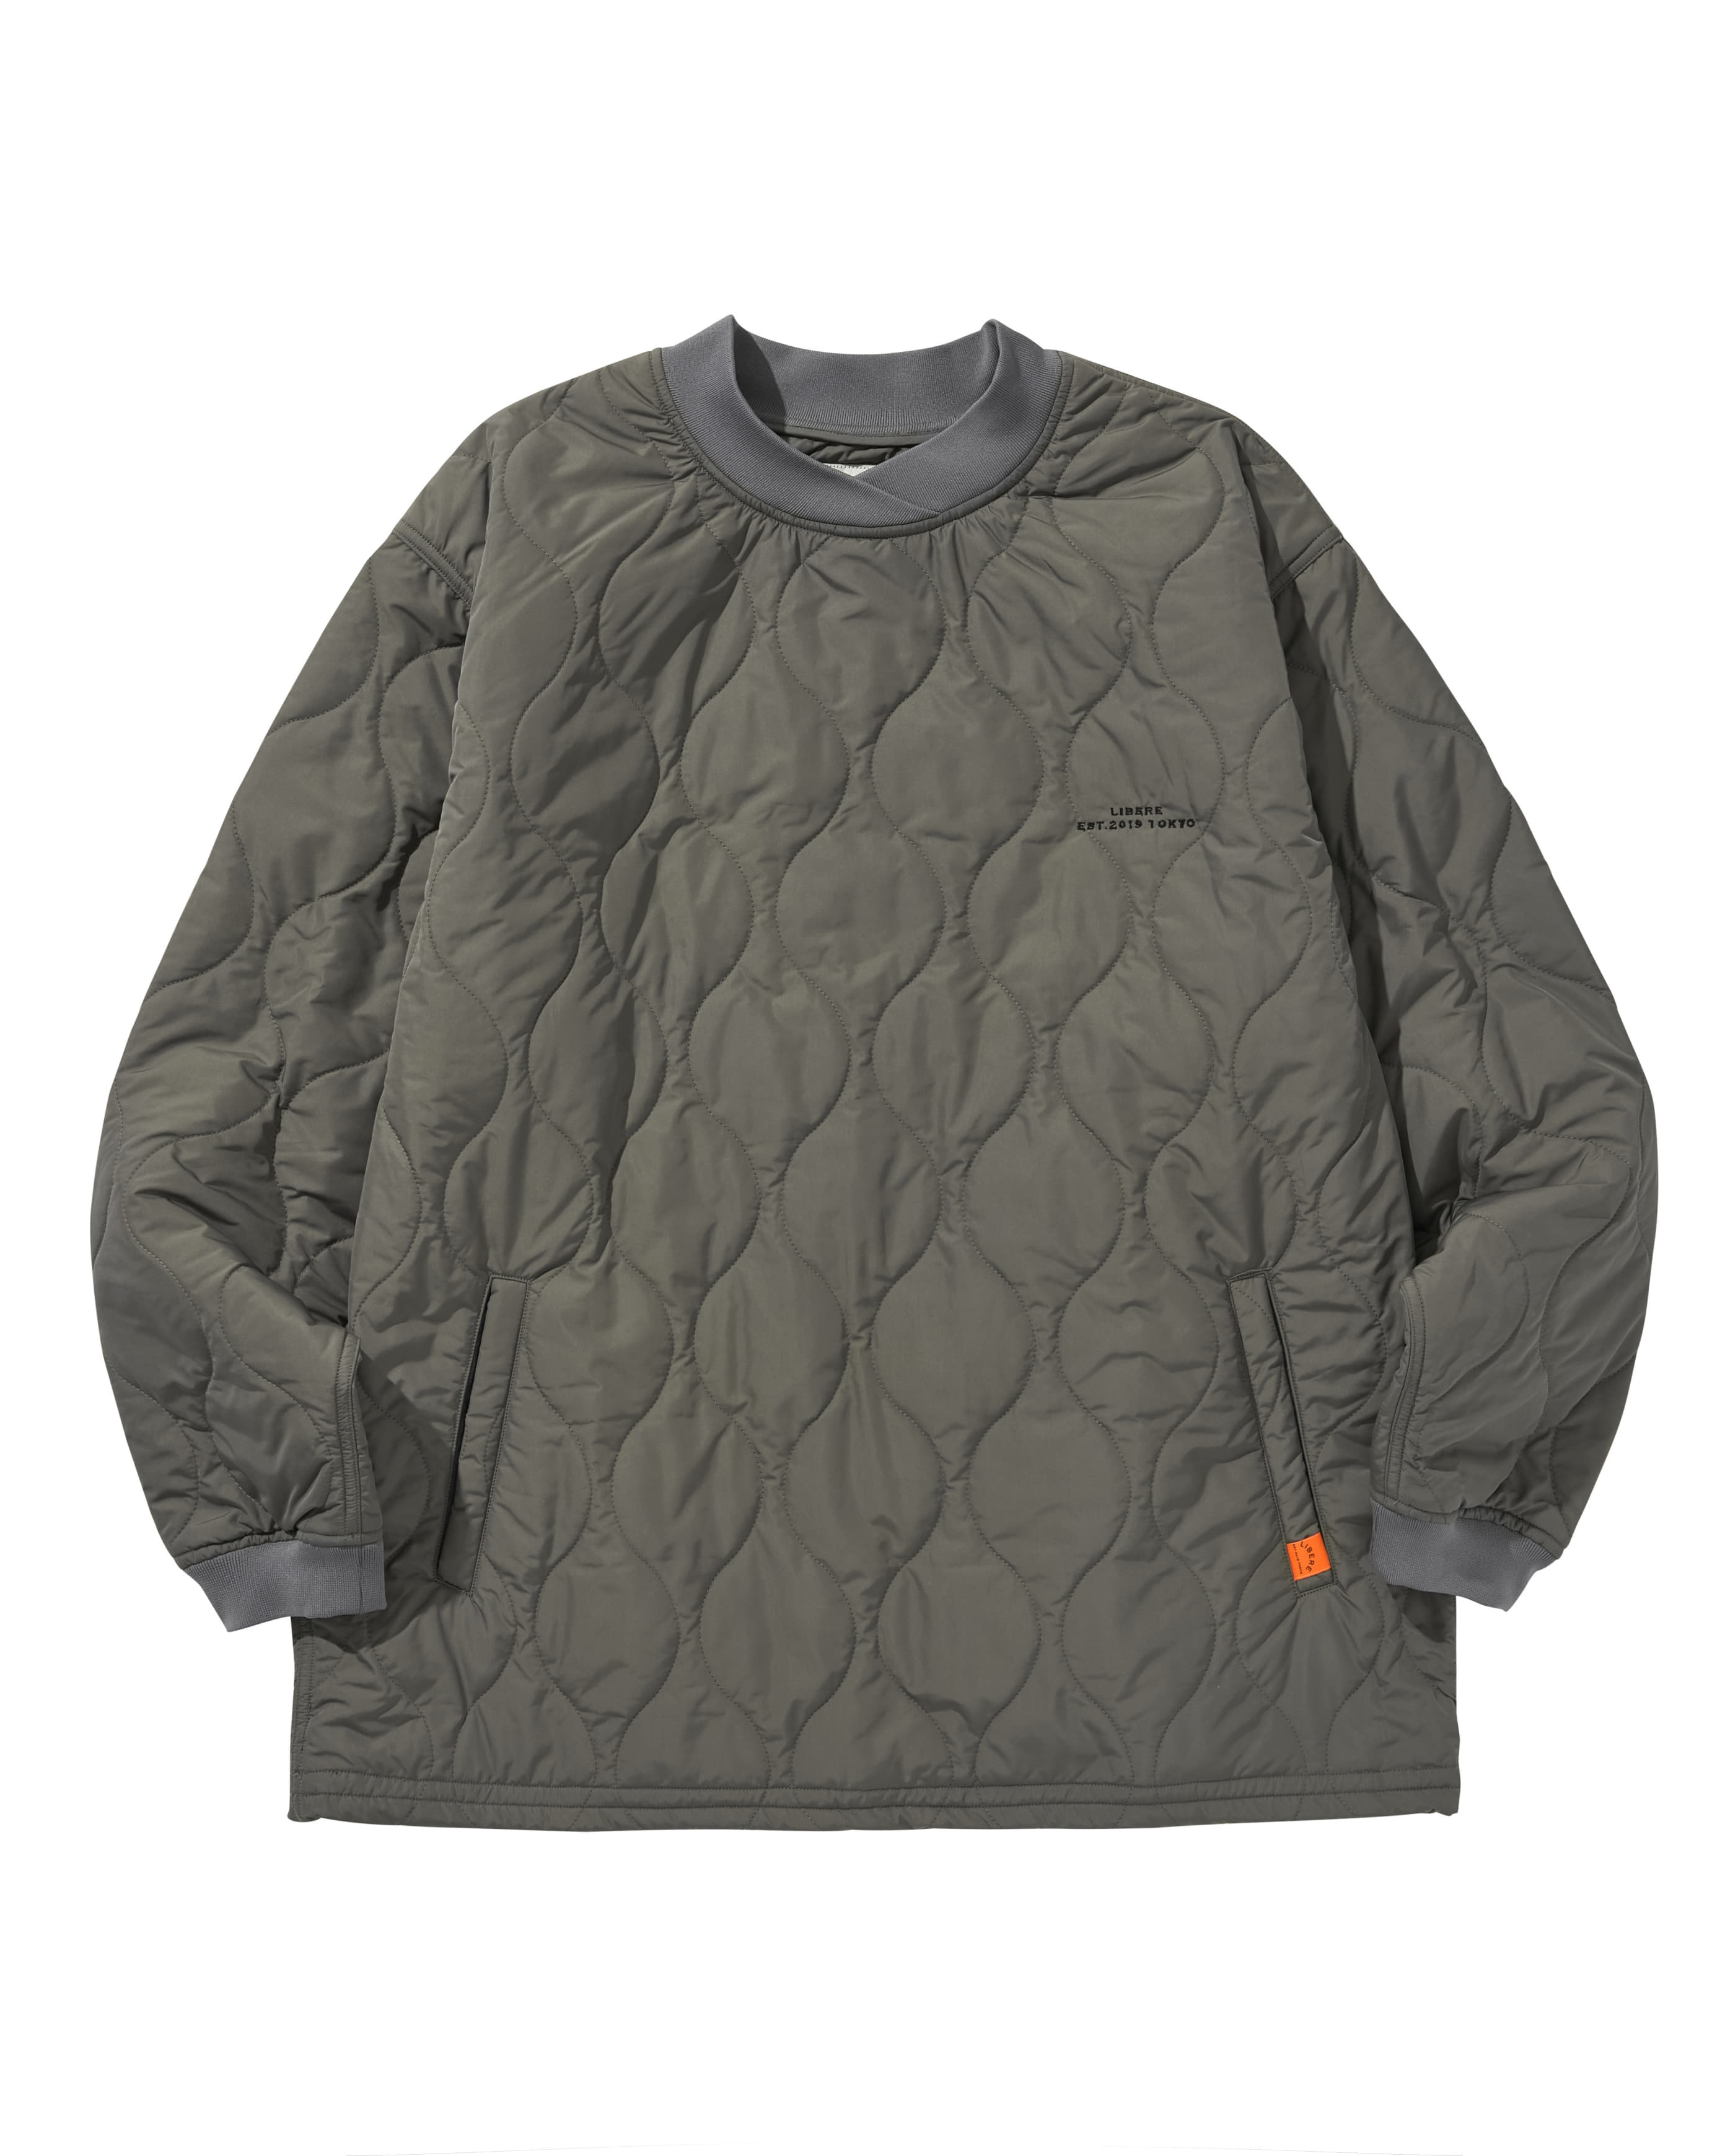 QUILTING PULL OVER JACKET / GRAY,BTS,JAPAN,FASHIONBRAND,LIBERE